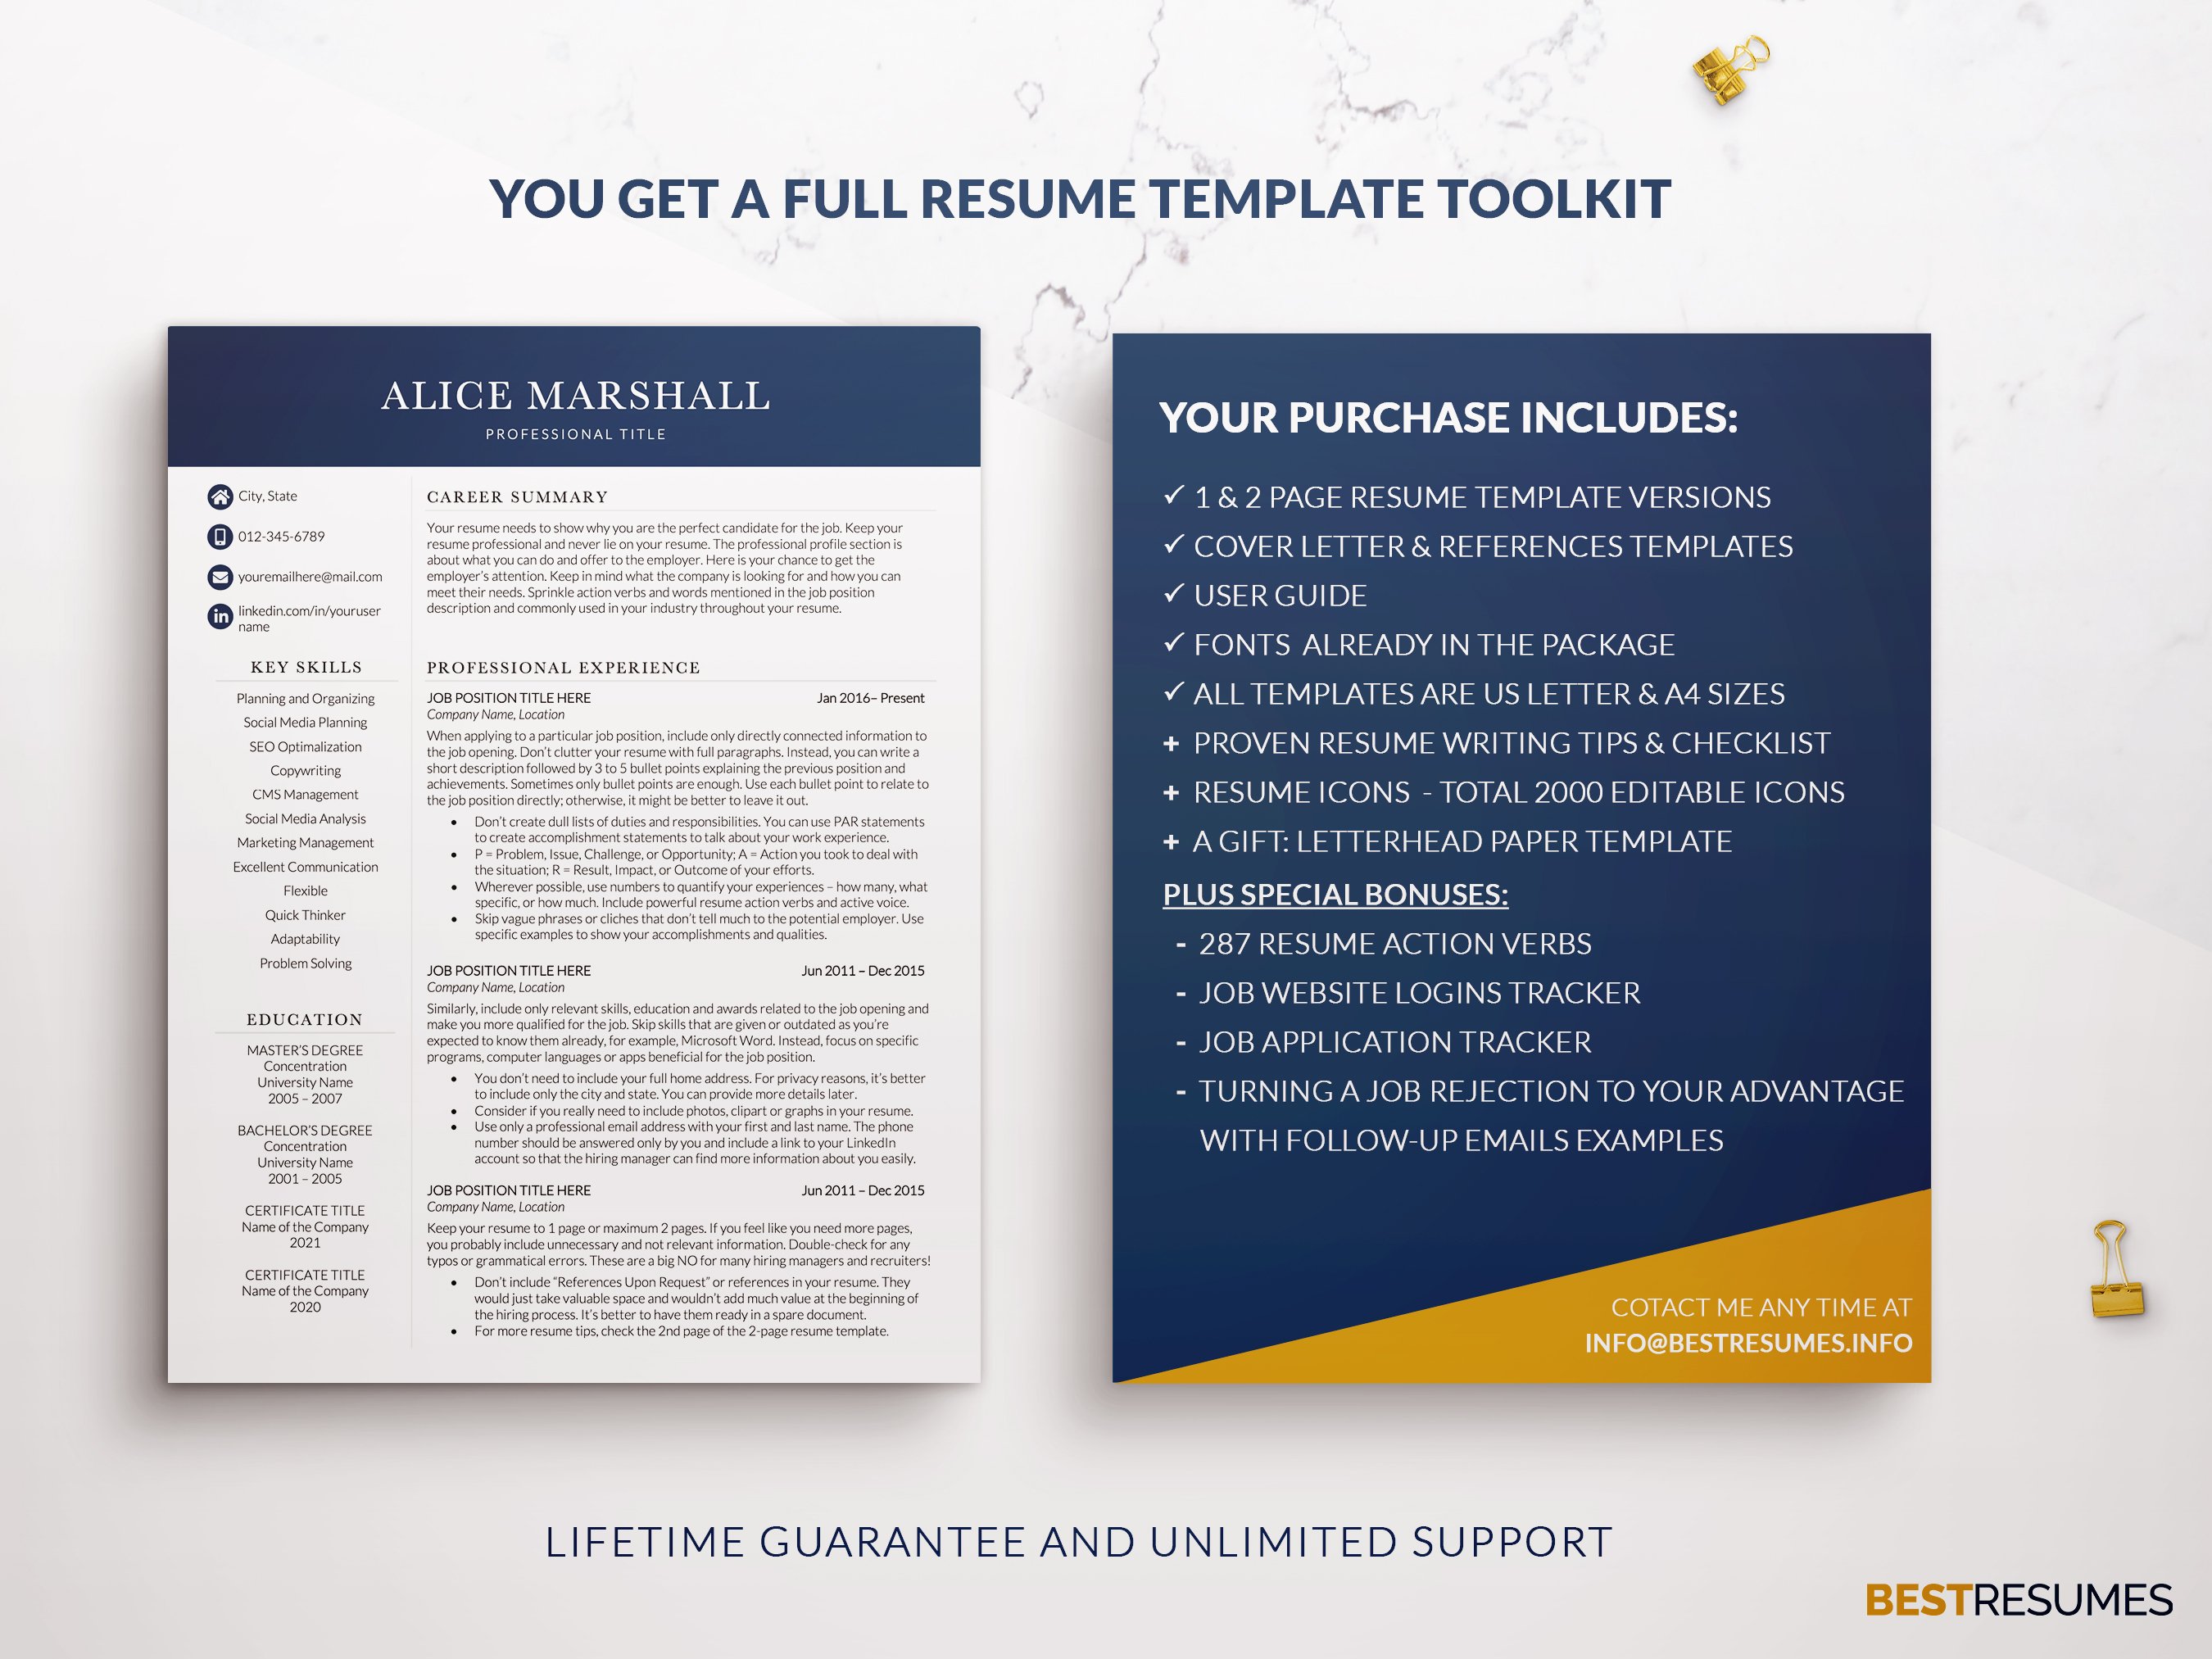 c level resume template resume package alice marshall 169